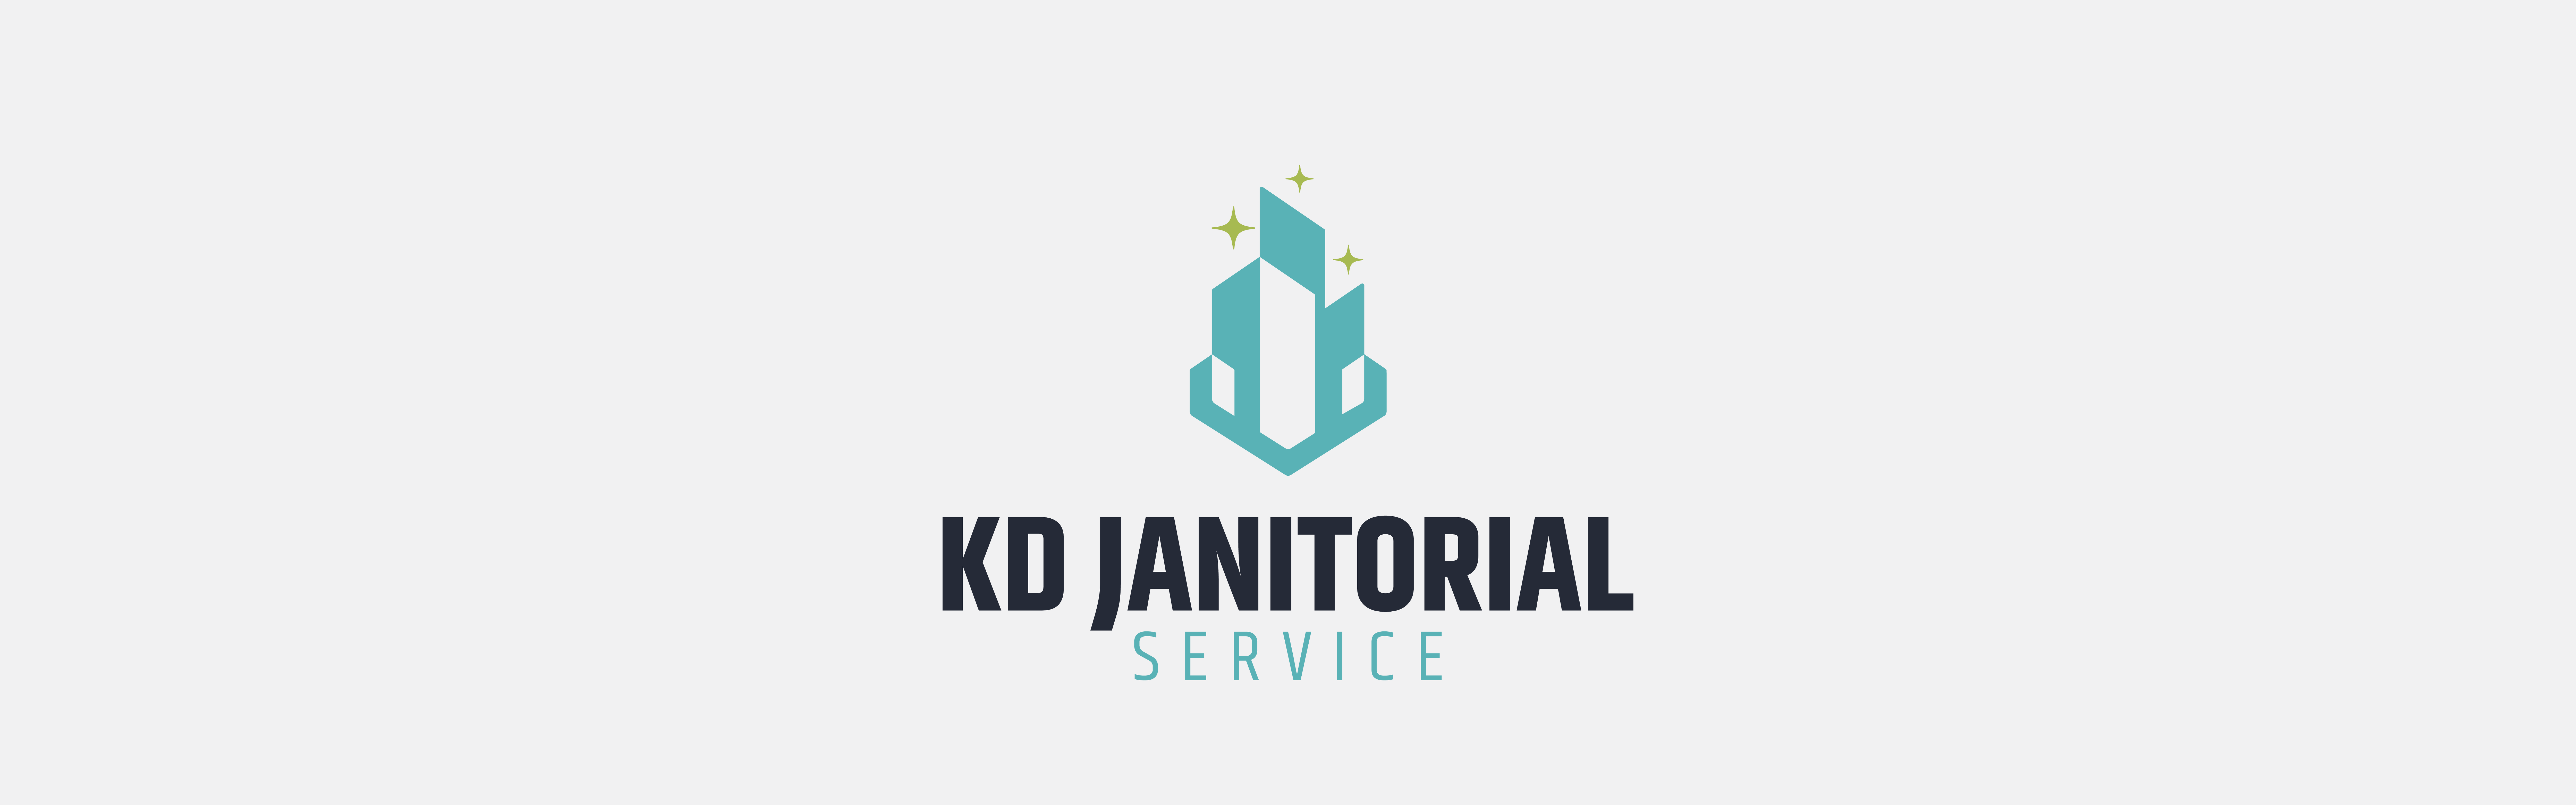 Logo of KD Janitorial Service, featuring a stylized broom and dustpan in a shield shape with sparkling stars above, indicating cleanliness or thorough service.